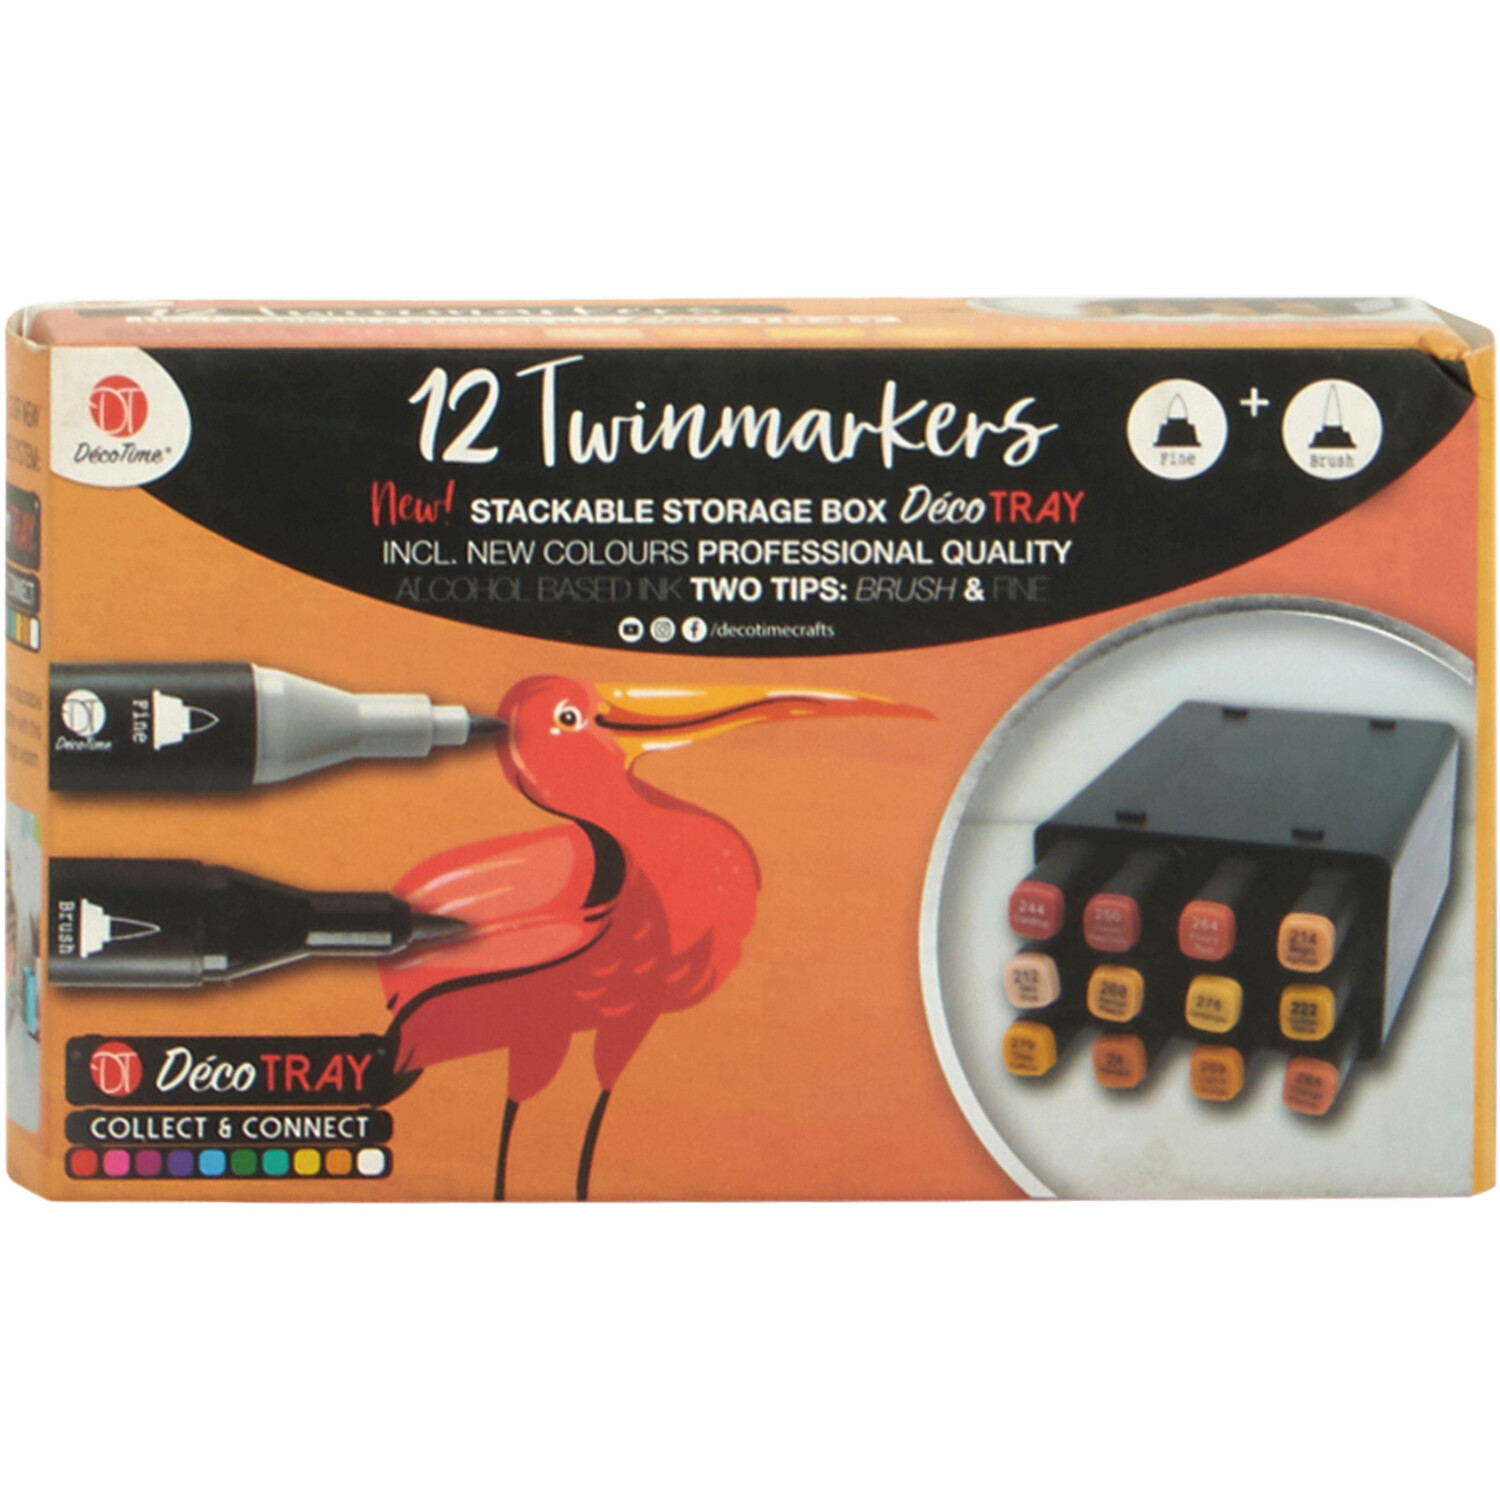 Pack of 12 Twin Markers In Deco Tray Image 1